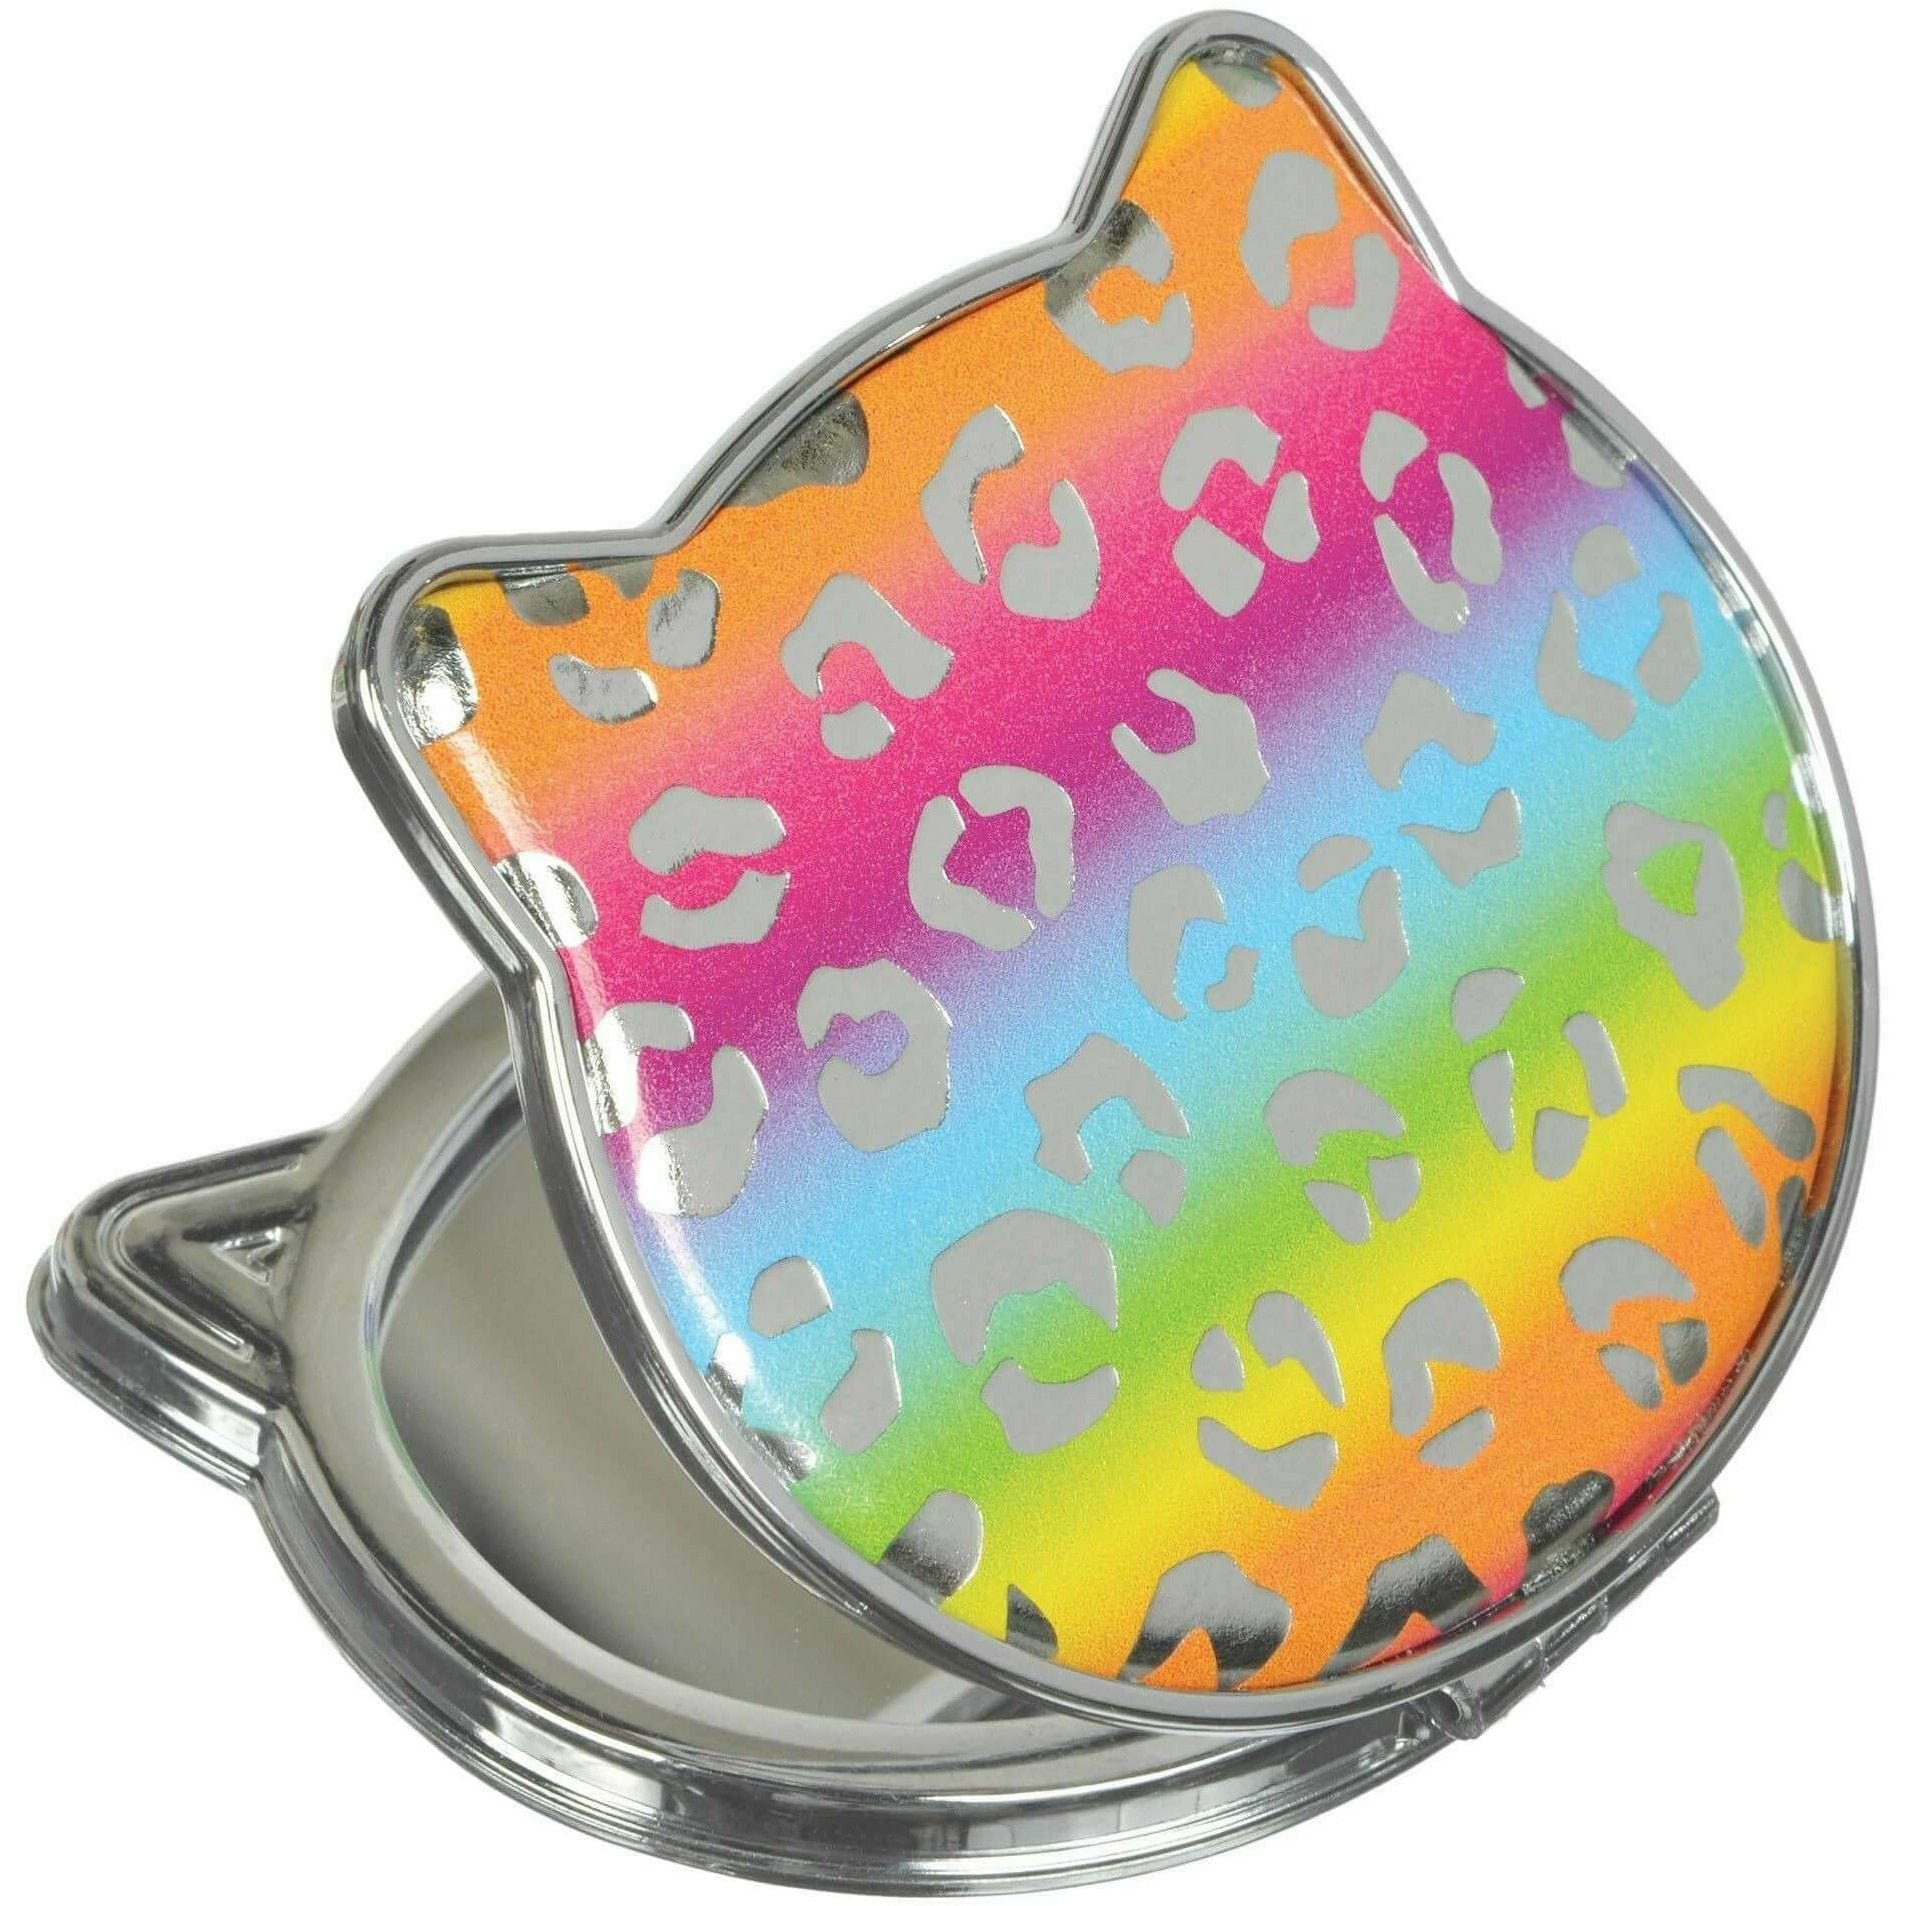 Amscan TOYS Cat Compact Mirror